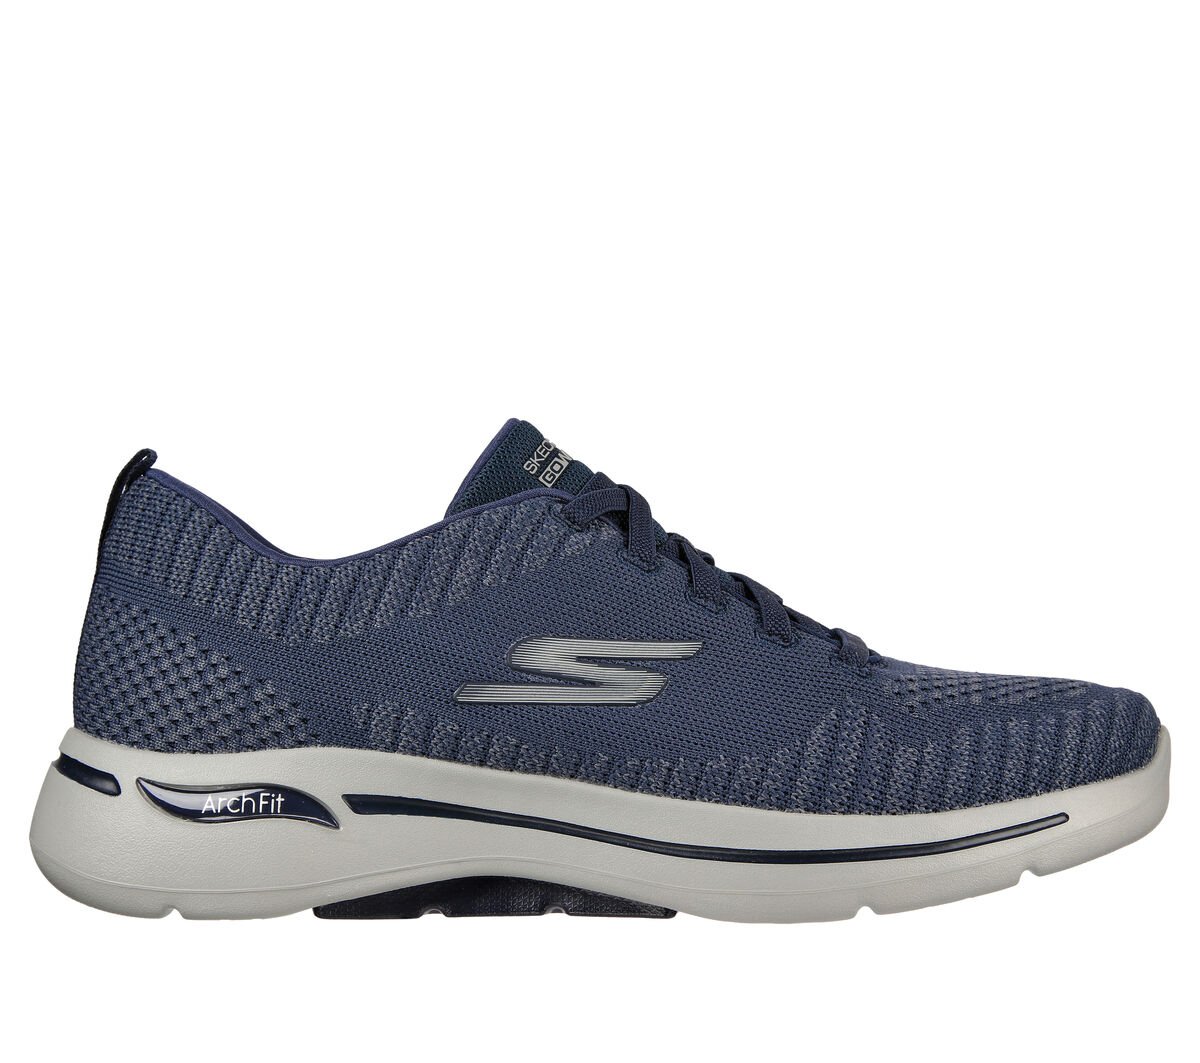 Discover the Skechers GO FLEX Walk - Muse in Gray Navy